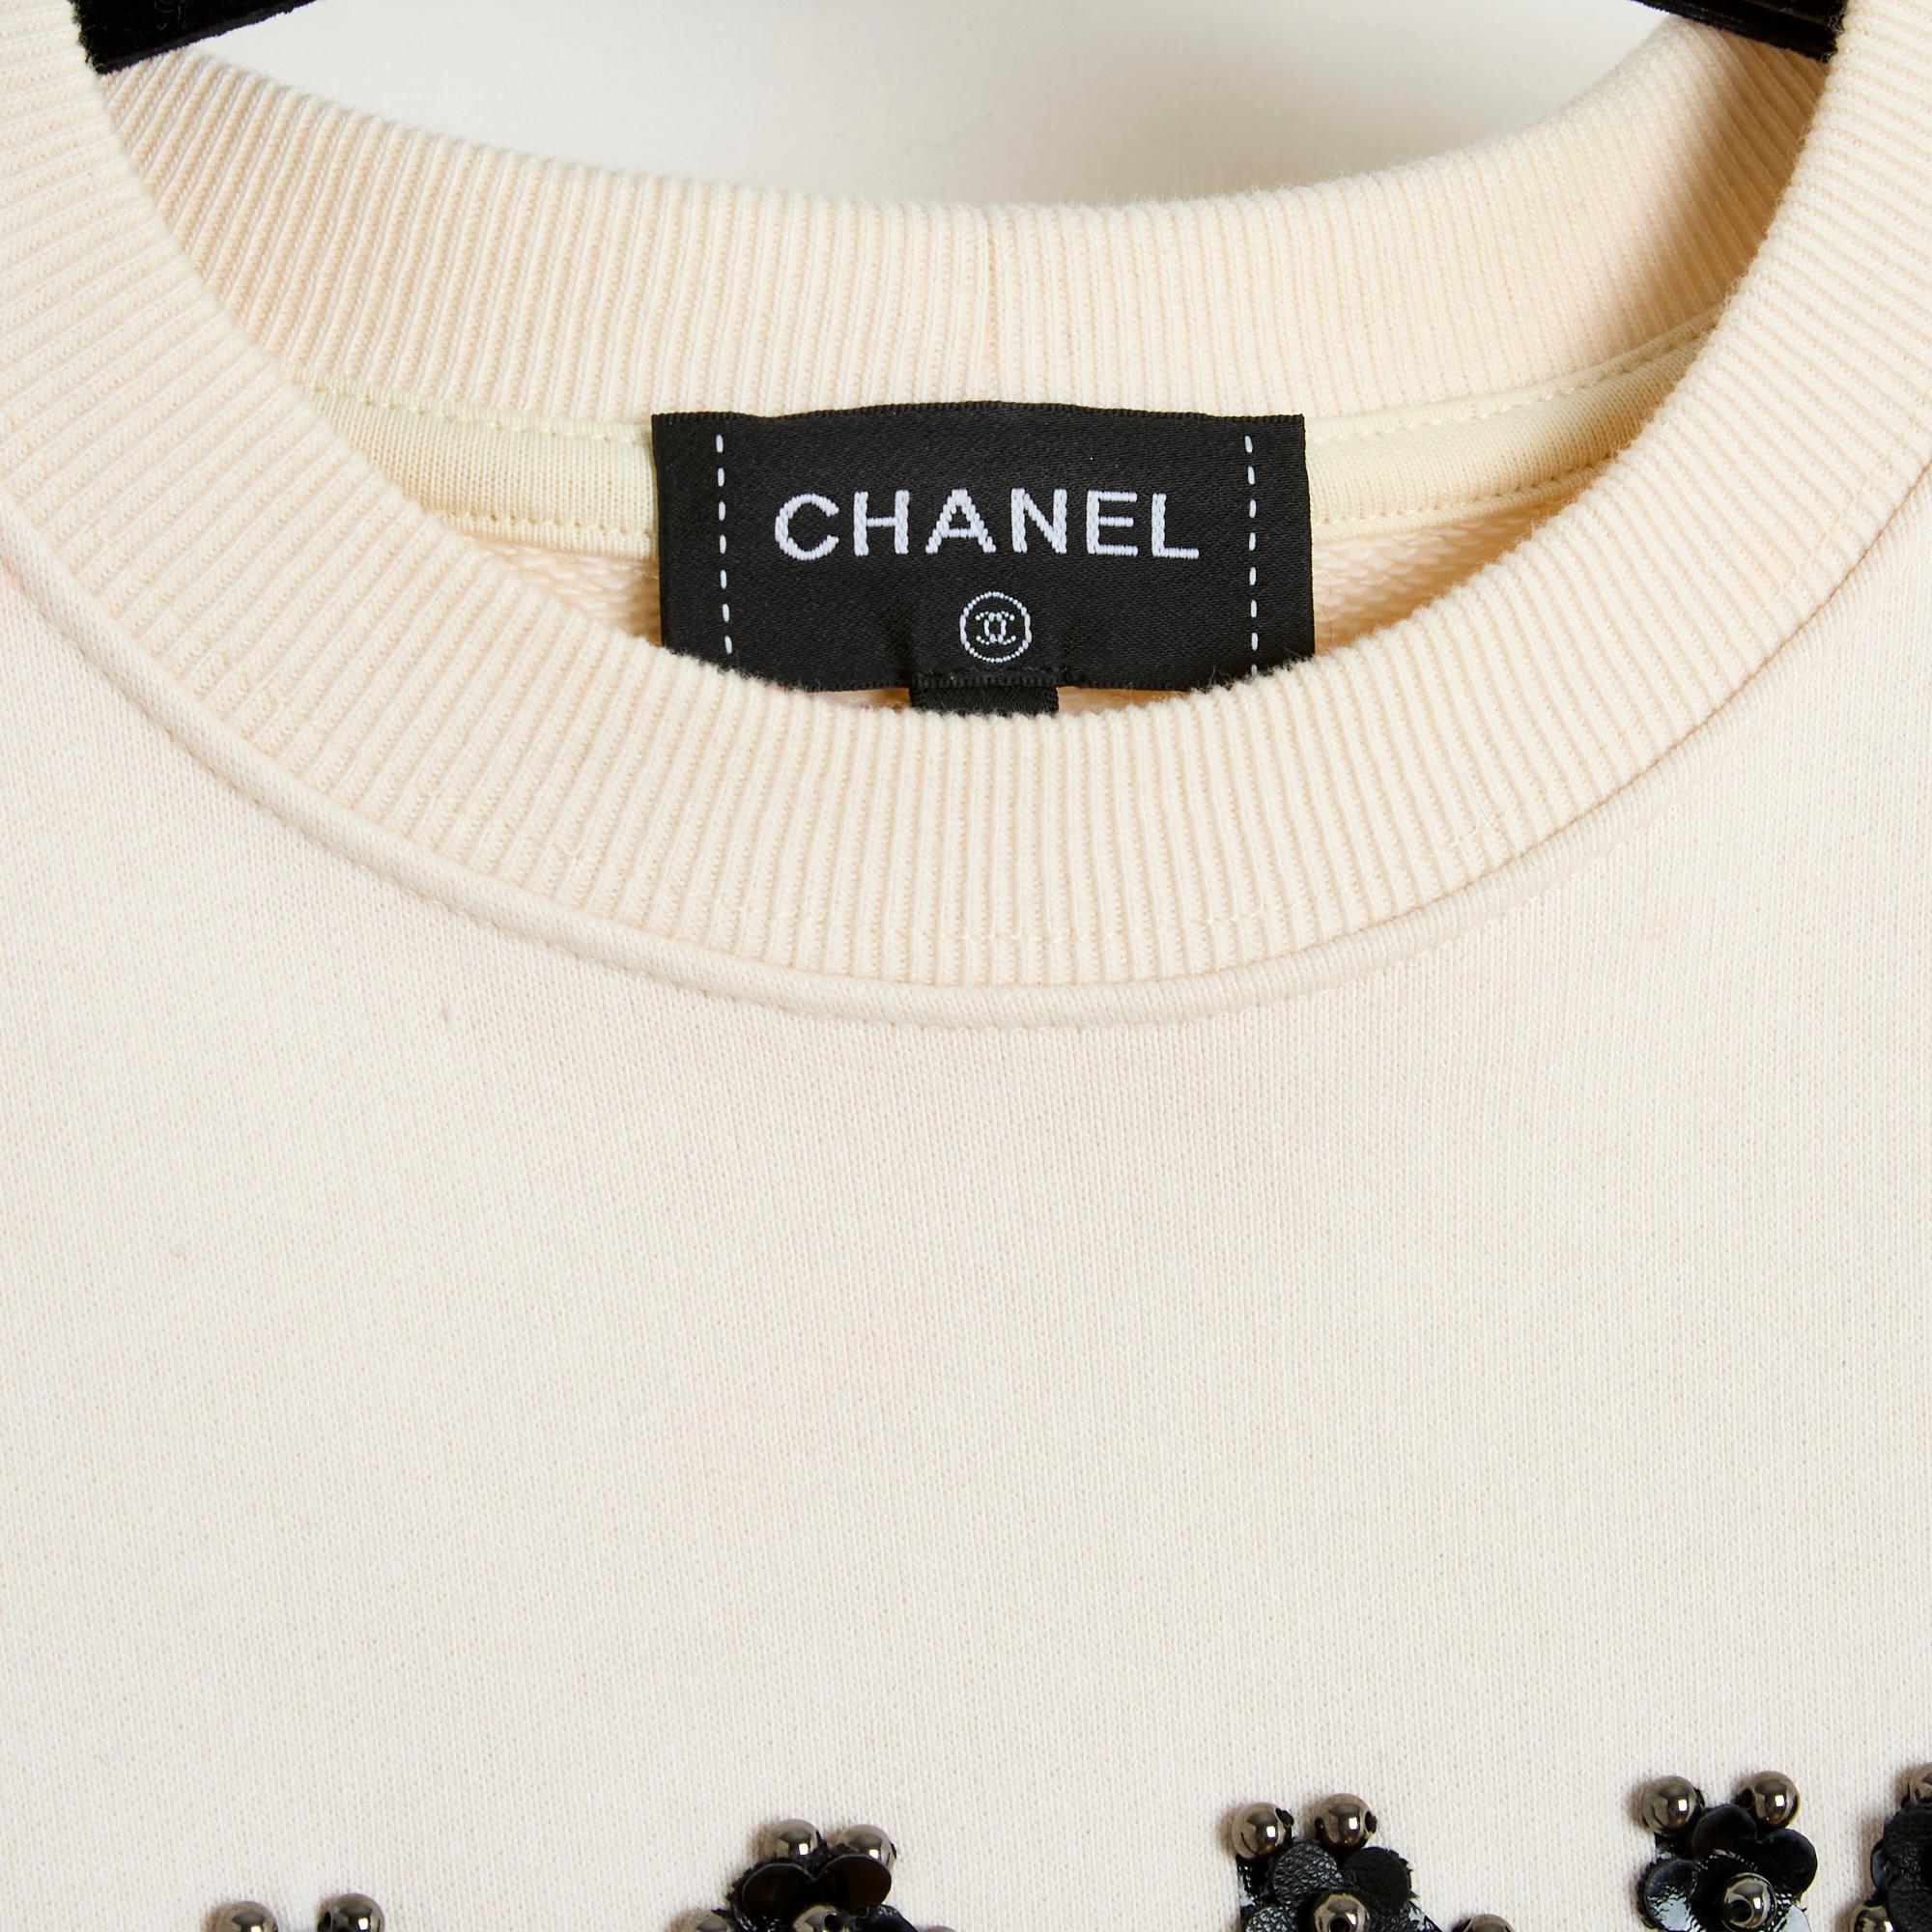 PF2020 Chanel Top Cambon S Sweat shirt Metiers Art 2020 In Excellent Condition For Sale In PARIS, FR